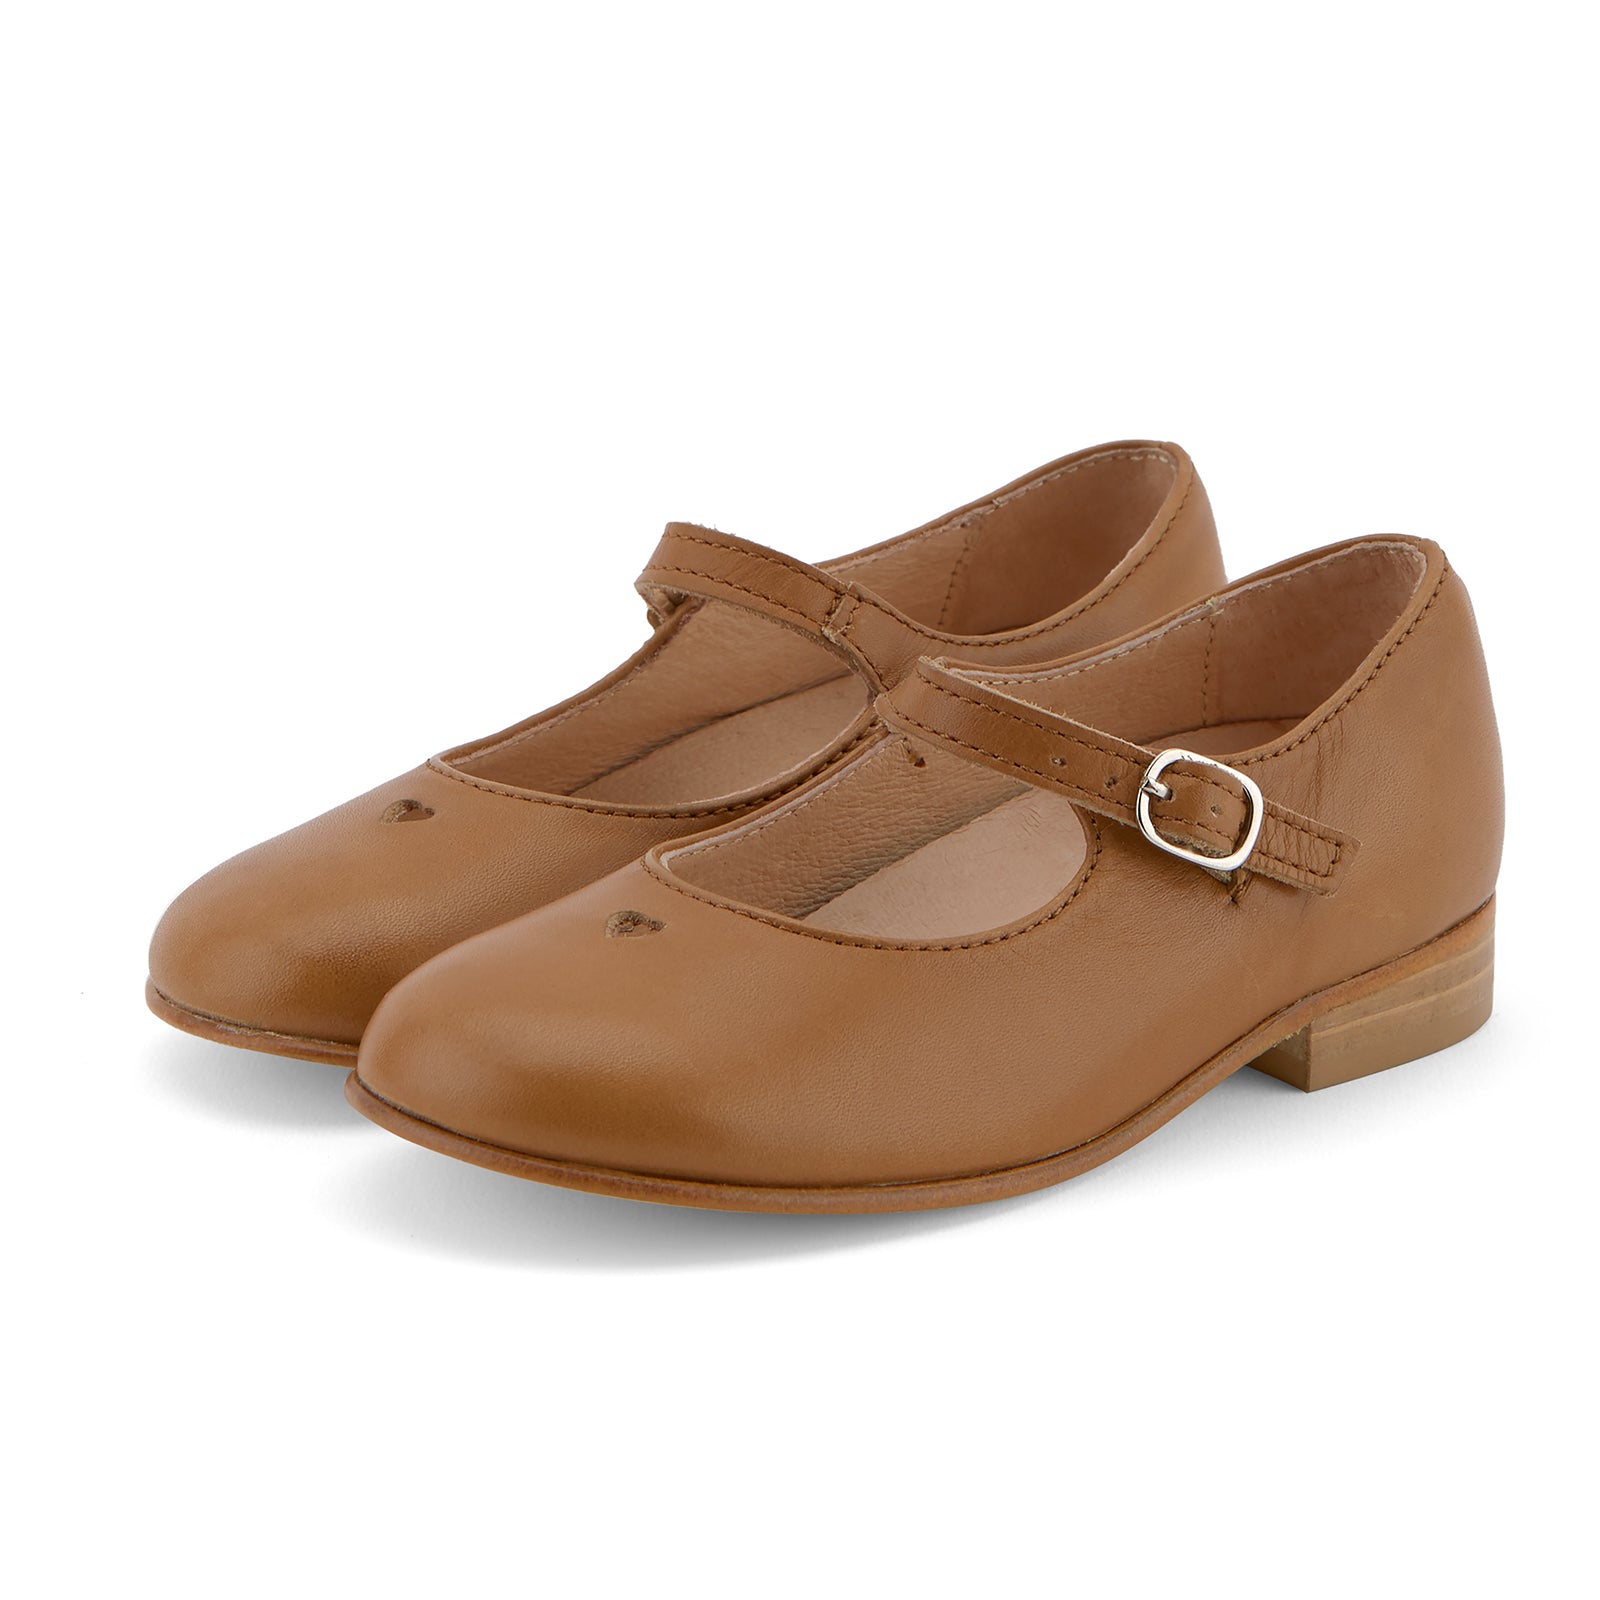 Young Soles Maggie T-Bar Leather Shoes - Tan/Vanilla